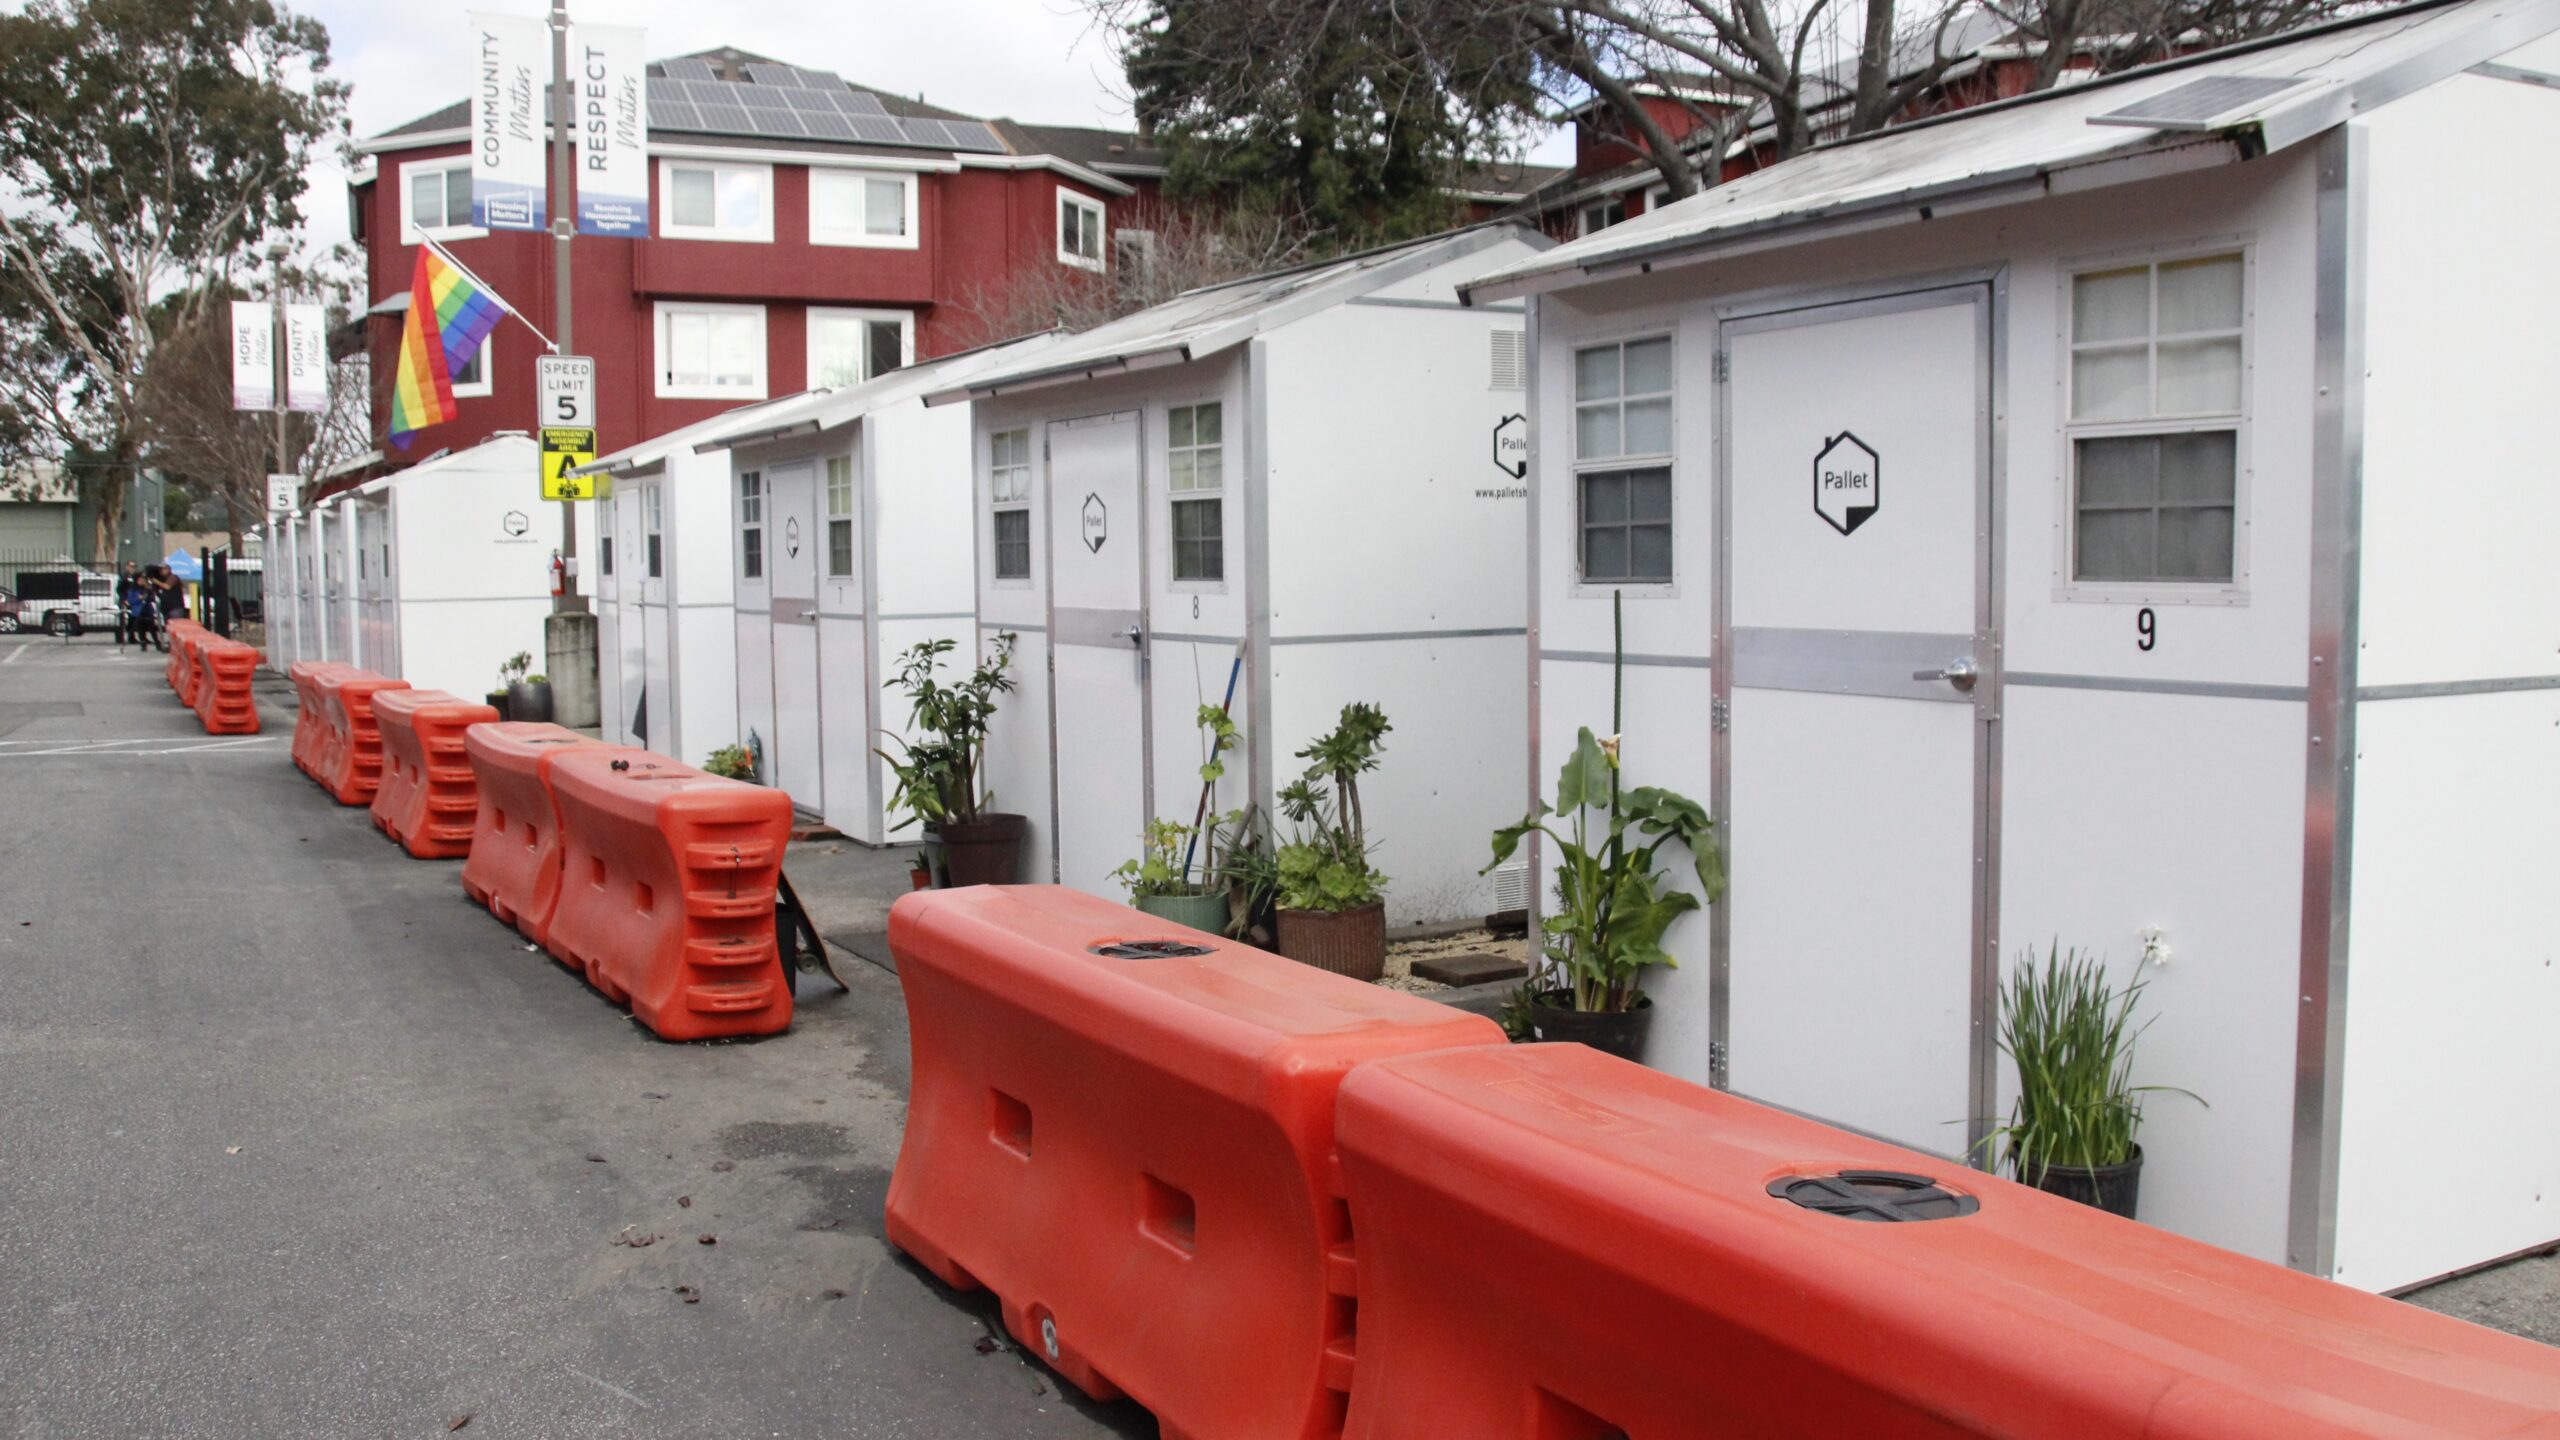 Pallet shelters are one of the homeless services aimed at reducing homelessness.